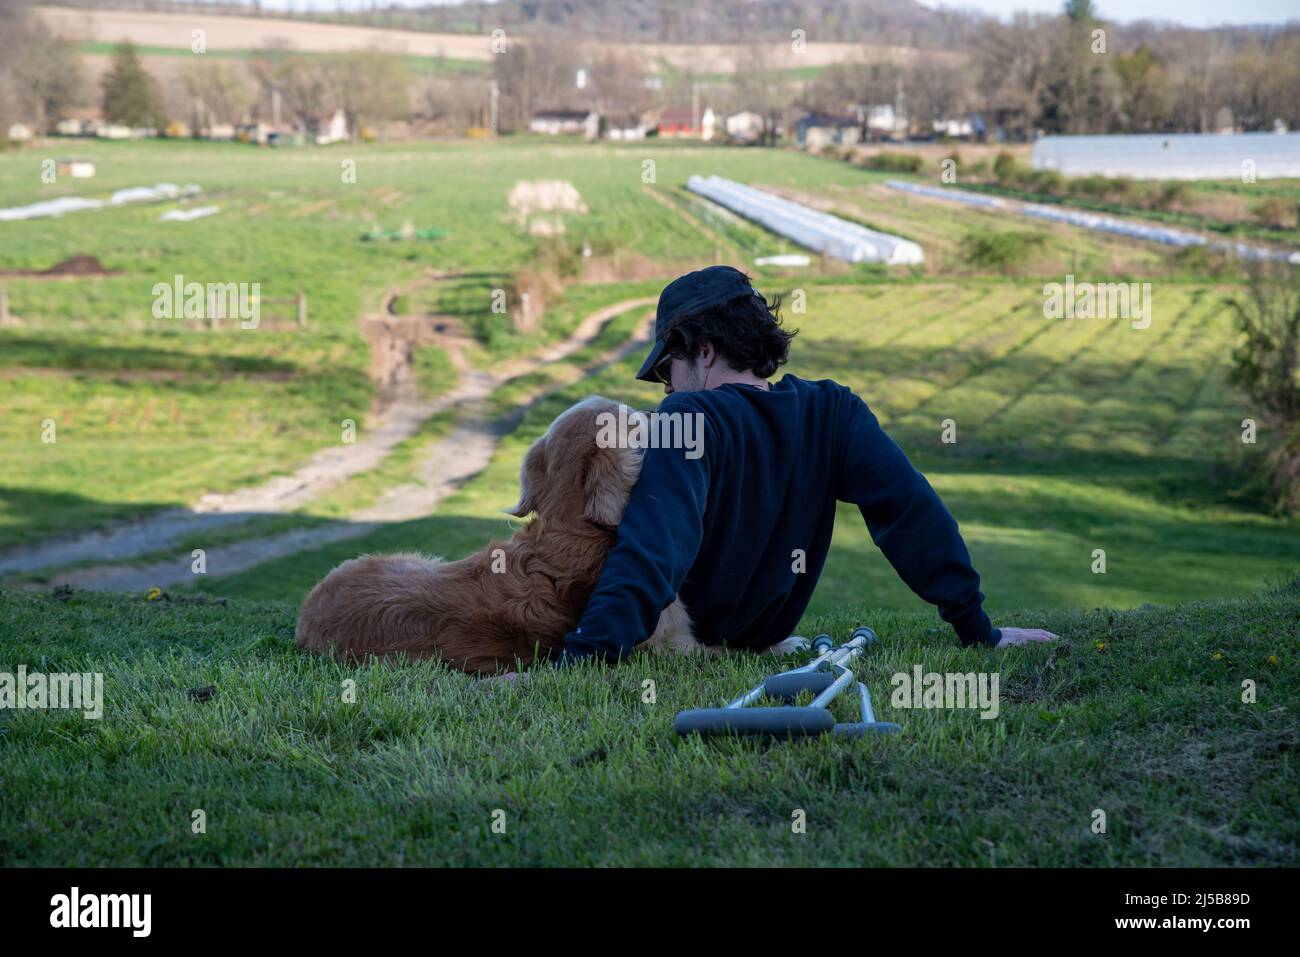 Crutches in the foreground of this idyllic rural farm background scene with a young man and his loving golden retriever dog cuddling and looking at ea Stock Photo